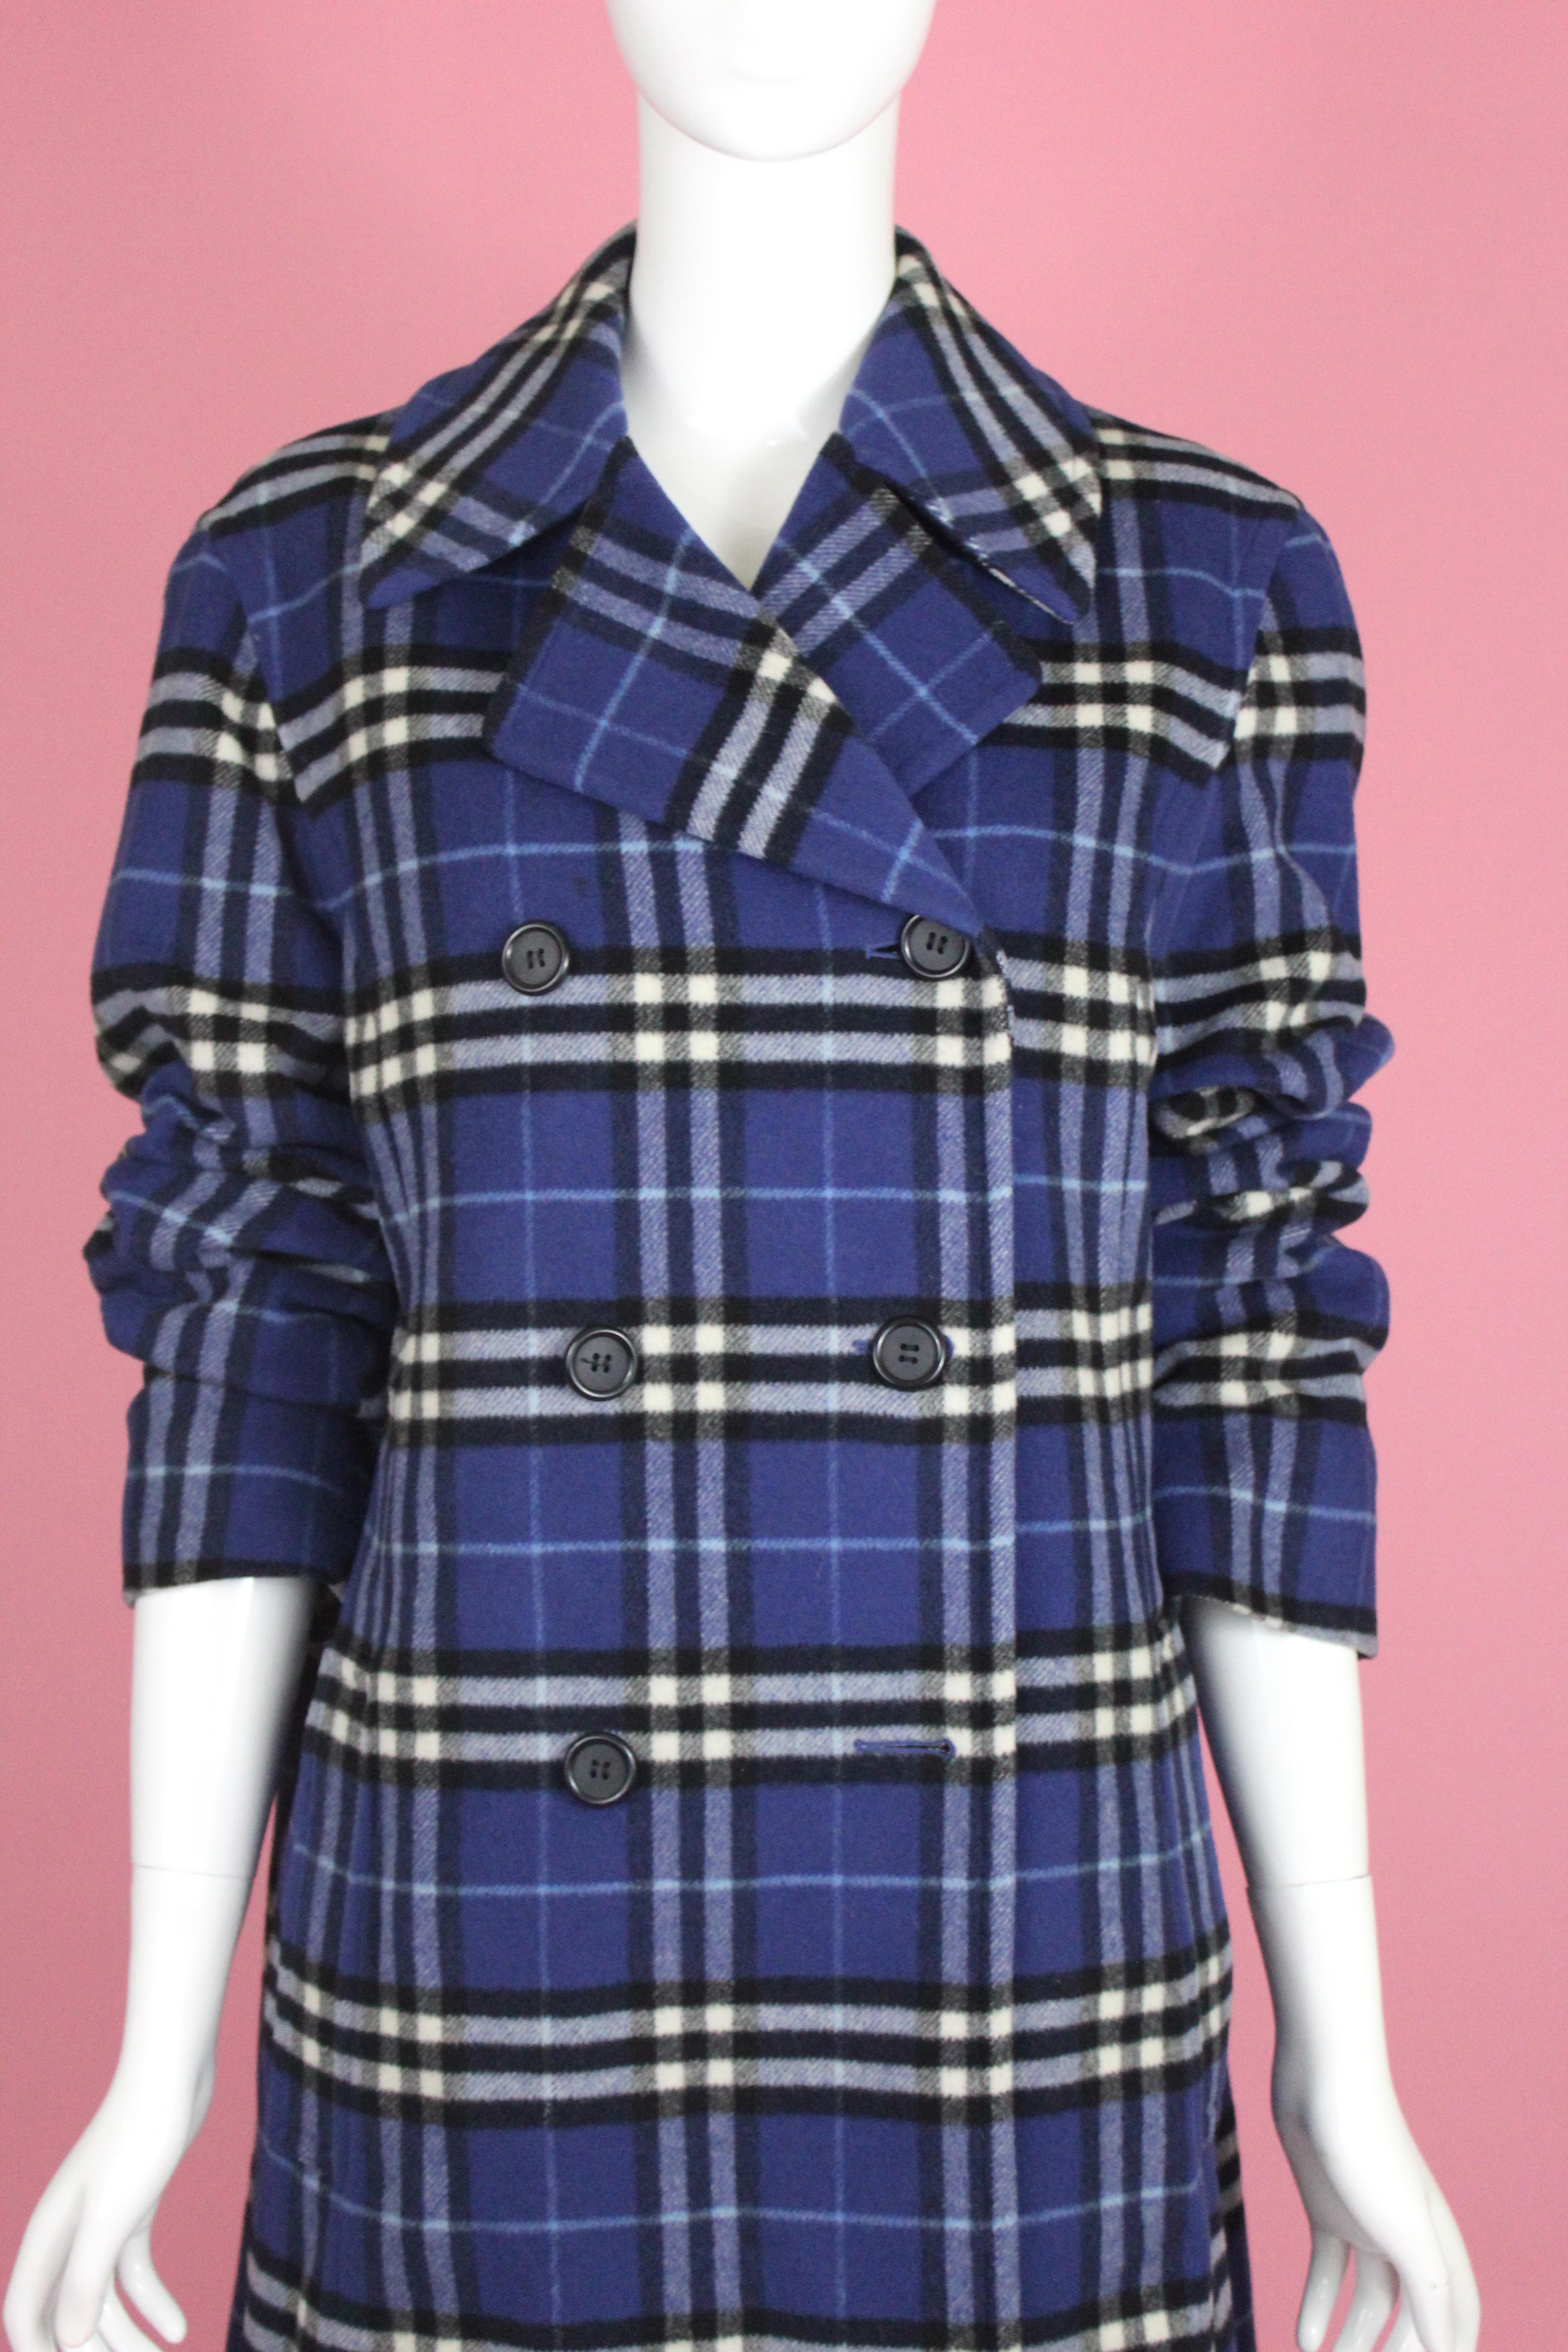 Burberry Women's Double Breasted Coat in Blue Check, c. 2000's, size 6 US In Excellent Condition For Sale In Los Angeles, CA